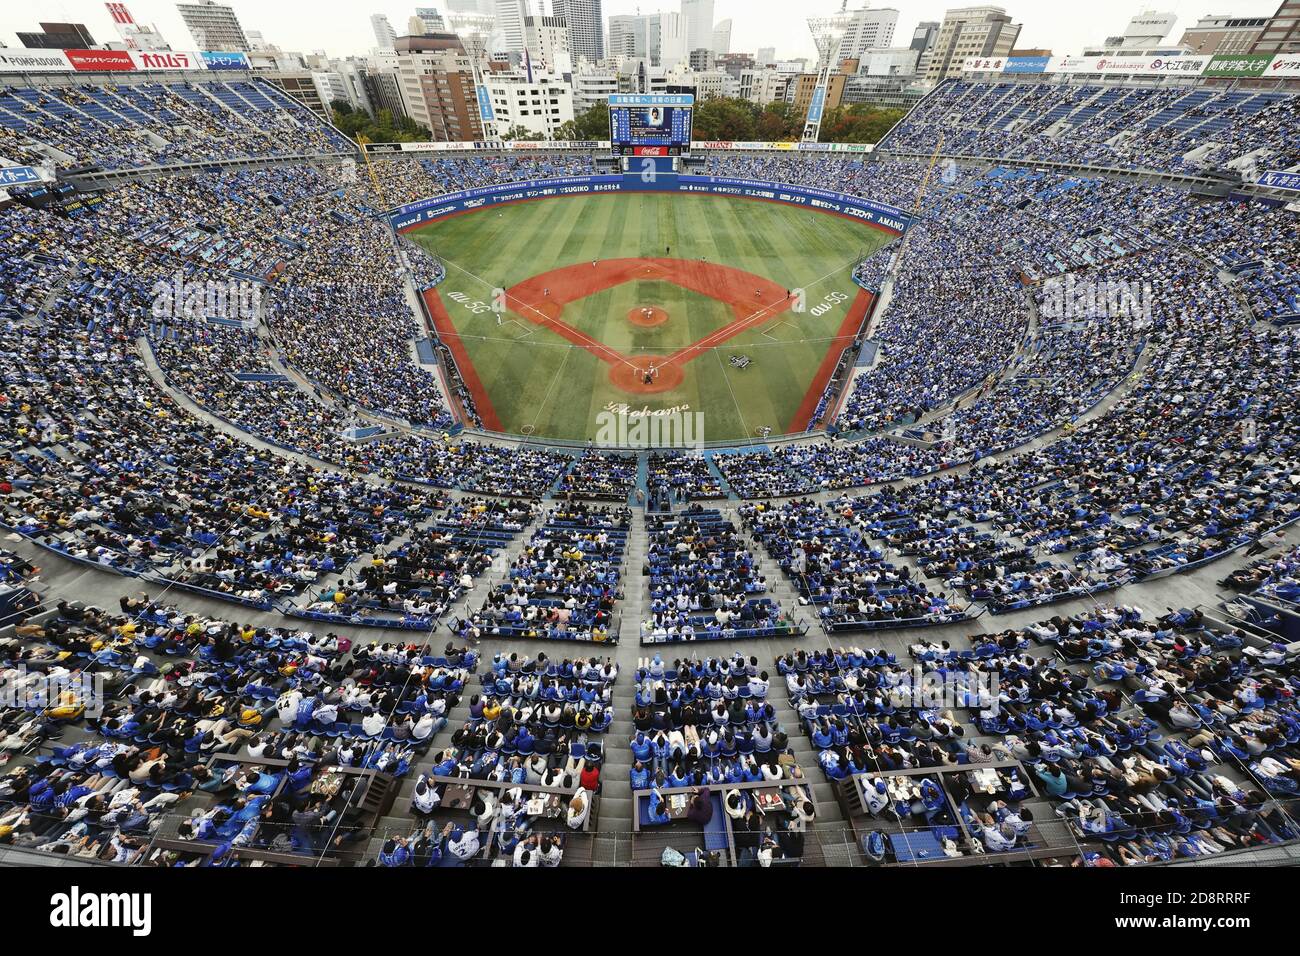 A baseball game between the DeNA BayStars and the Hanshin Tigers is played  at Yokohama Stadium on Nov. 1, 2020, the last day of a three-day trial to  study ways to mitigate